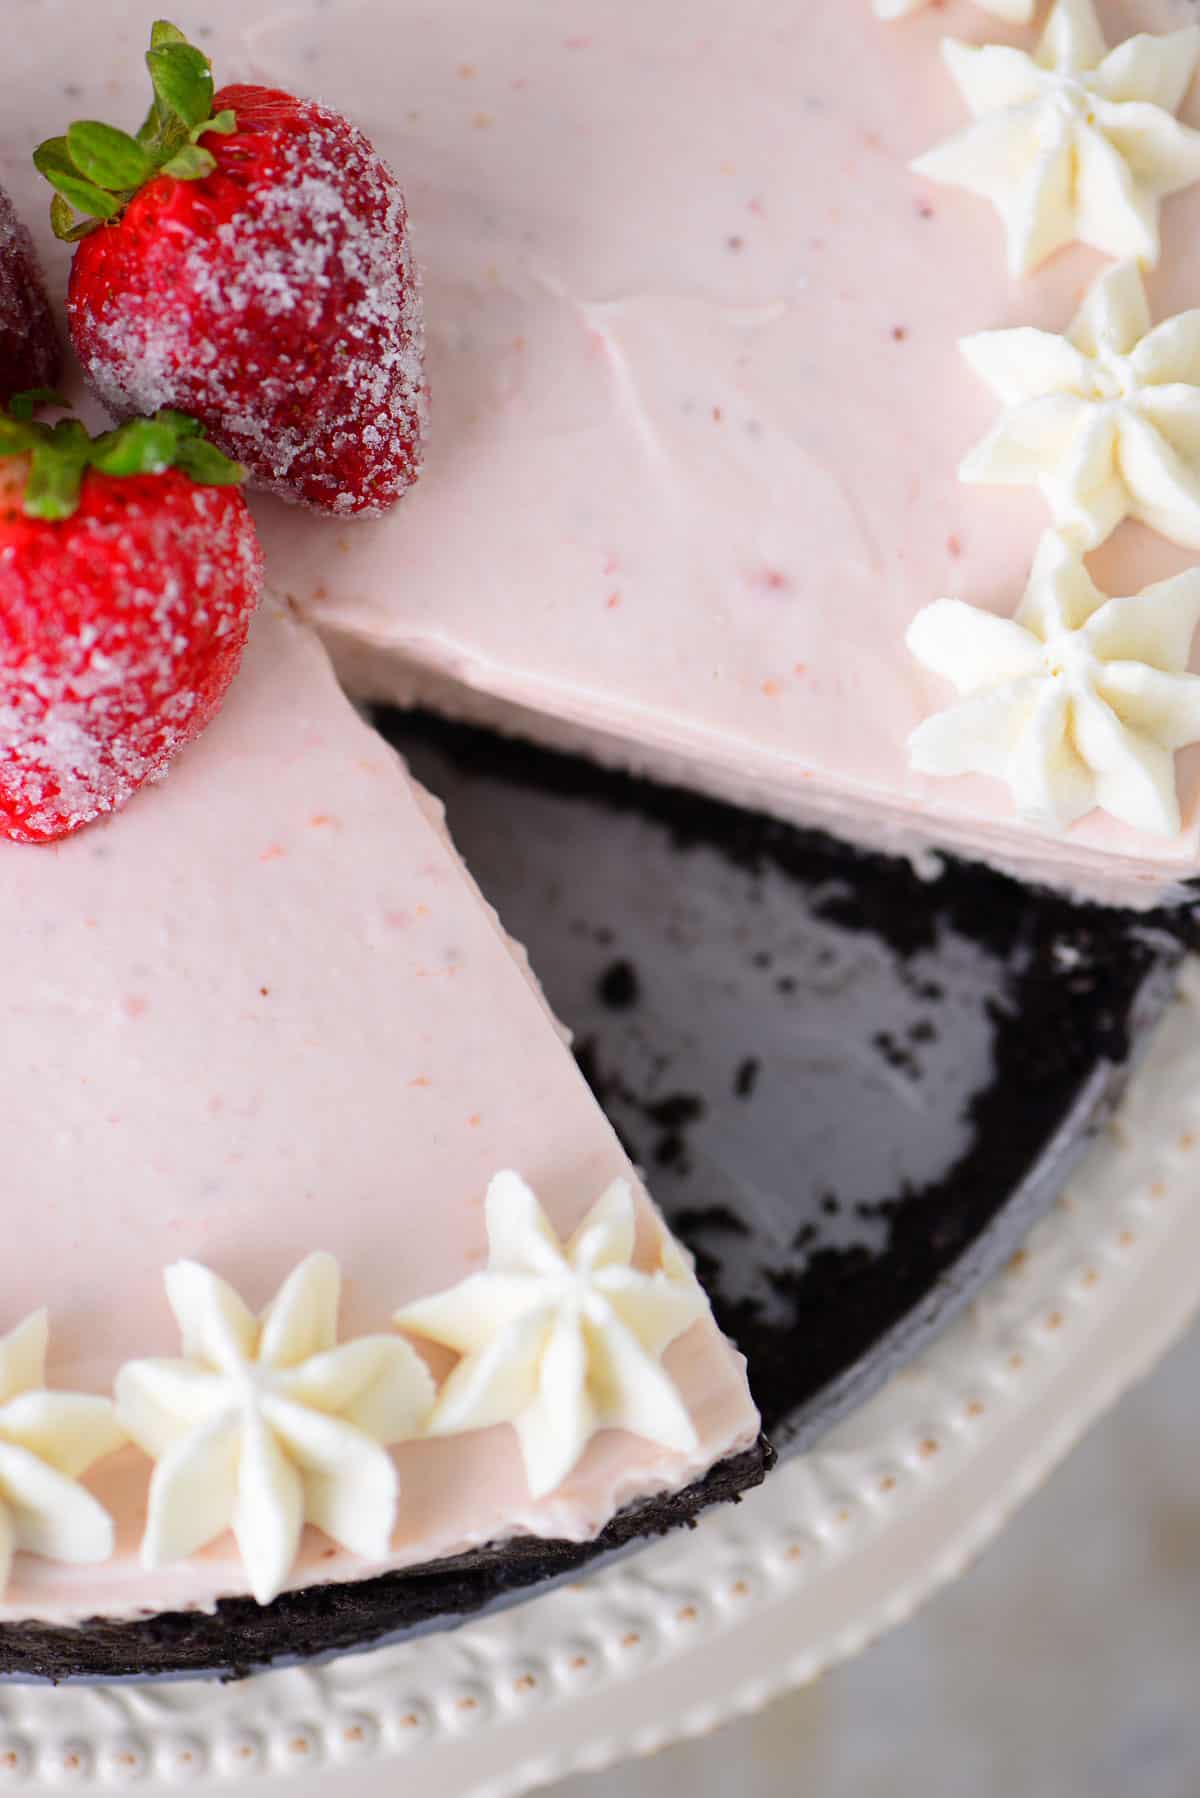 a slice out of the strawberry cheesecake